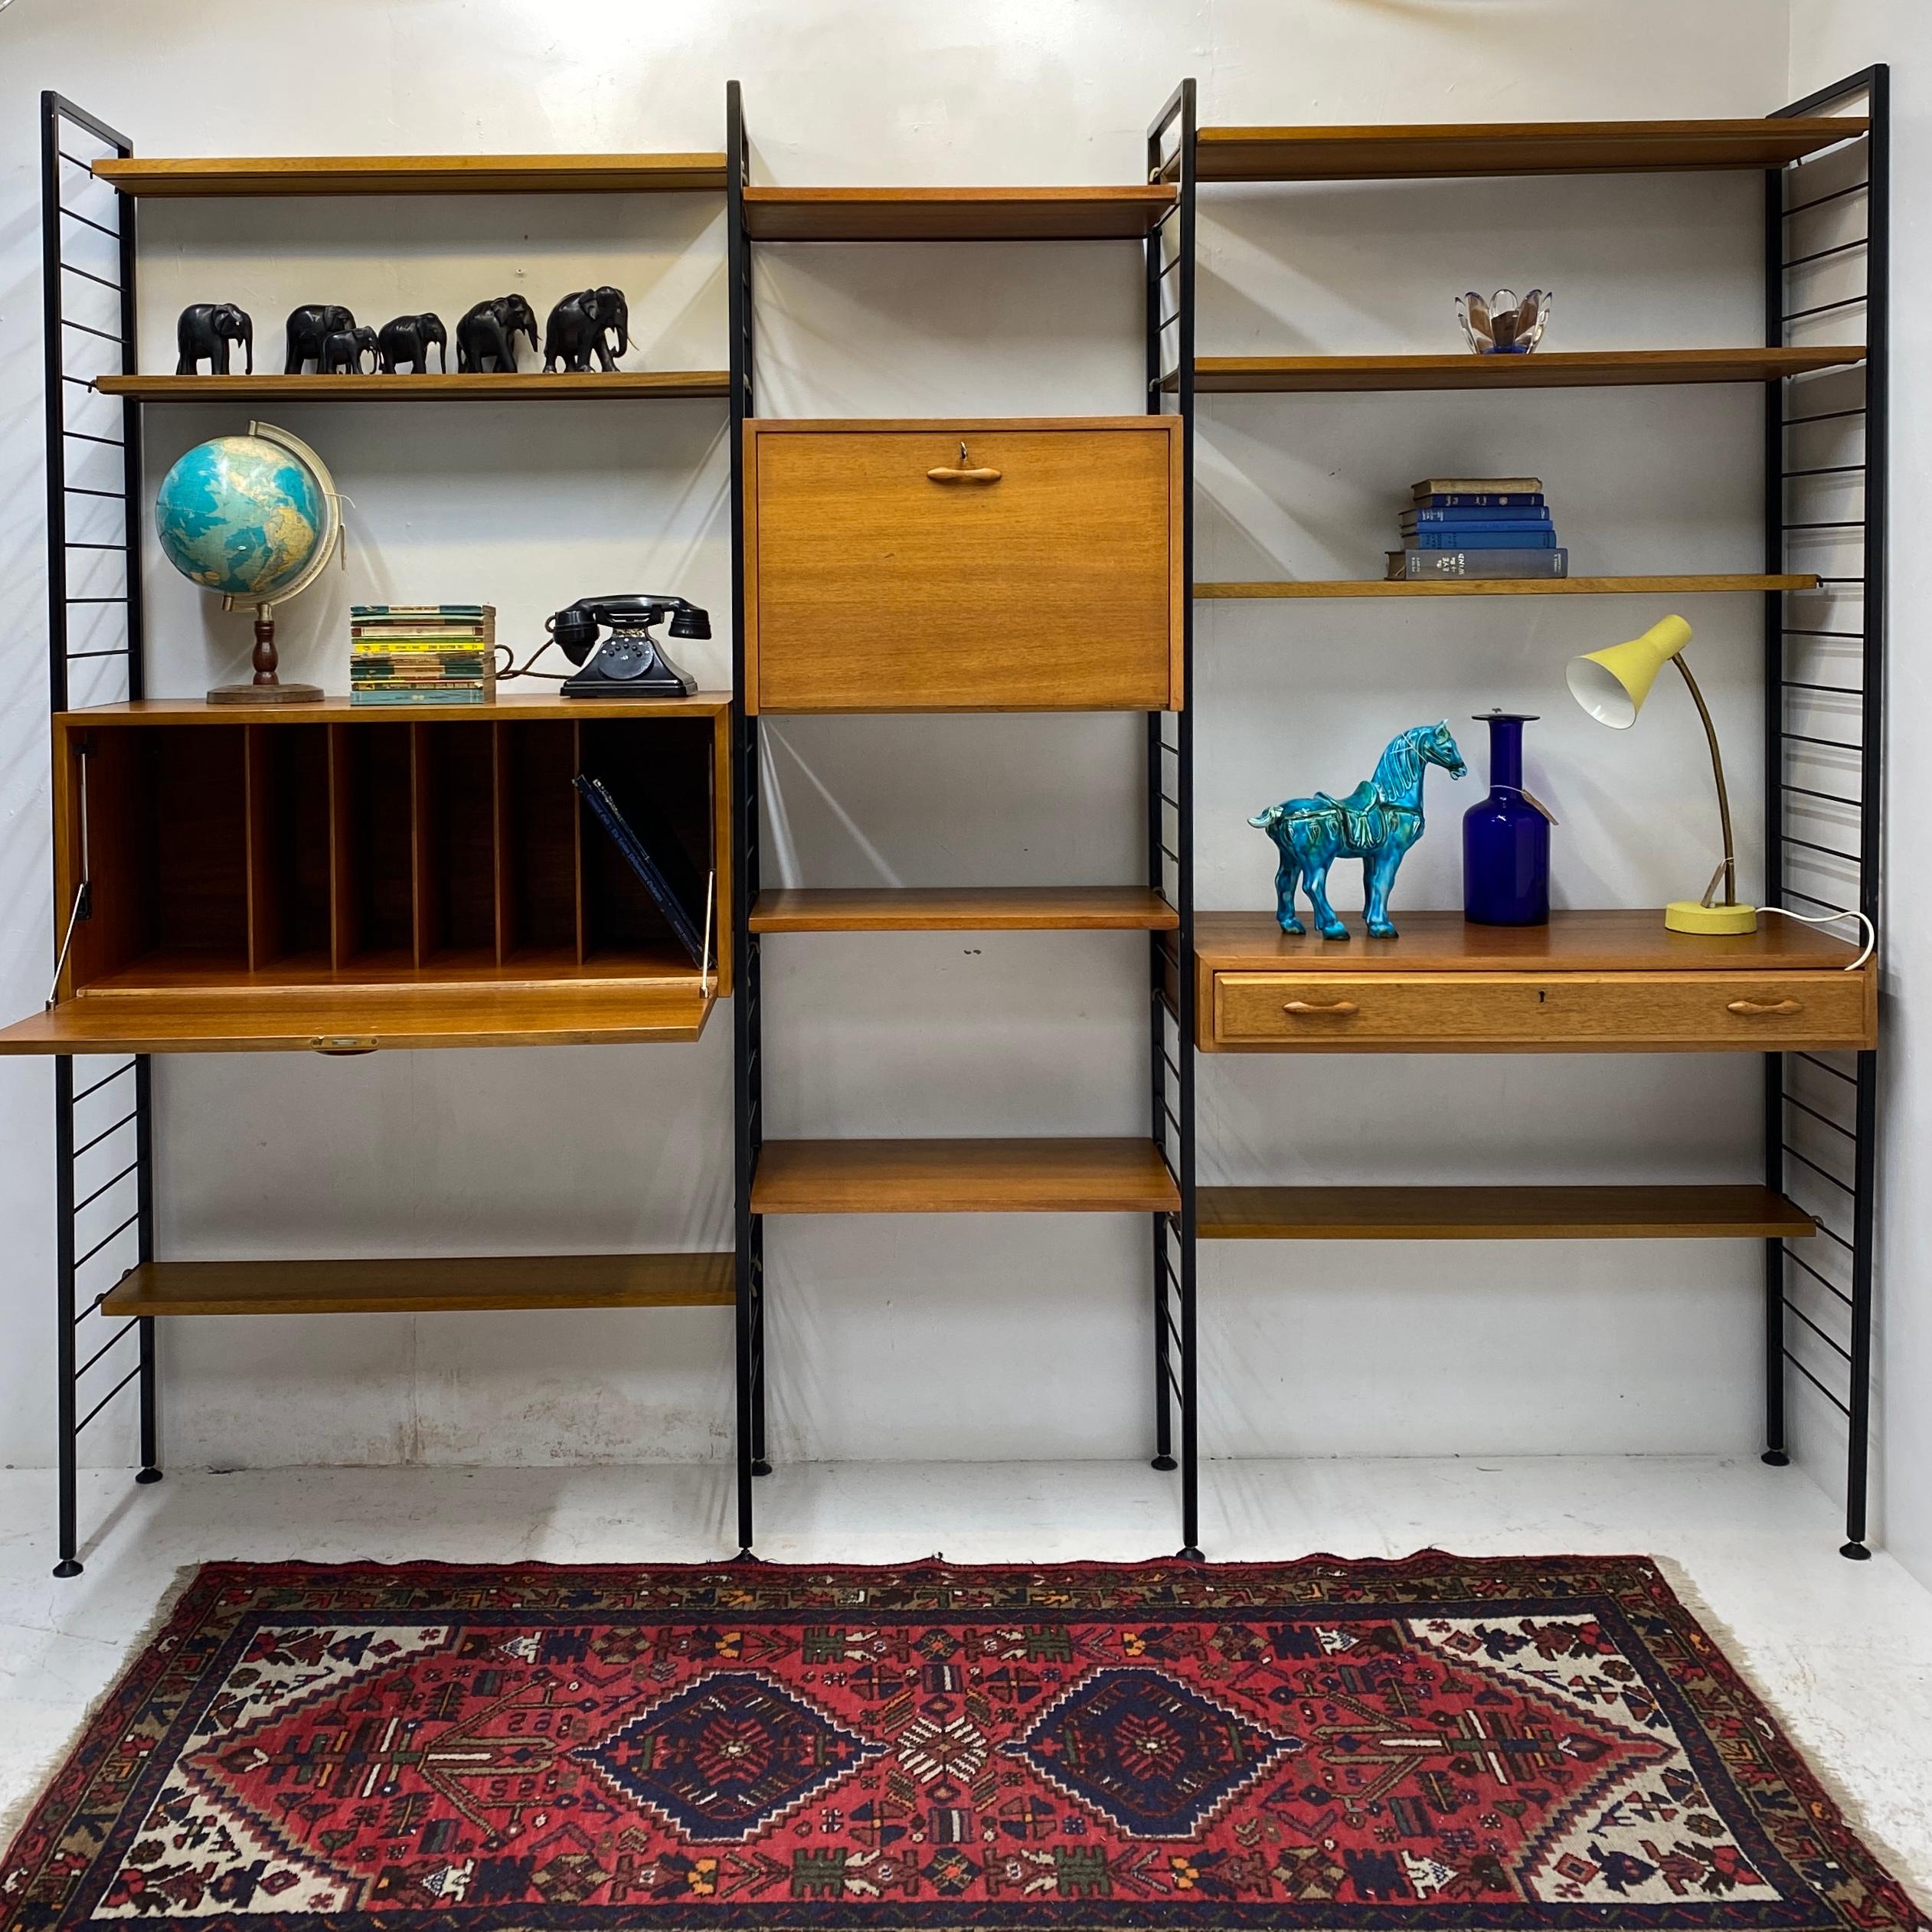 A fabulous vintage ladderax 'staples' system. The ladderax system is made of three bays. The side ladders are in black steel & have both feet on the ground, which makes this system appropriate as a wall unit or a room divider. The ladderax system